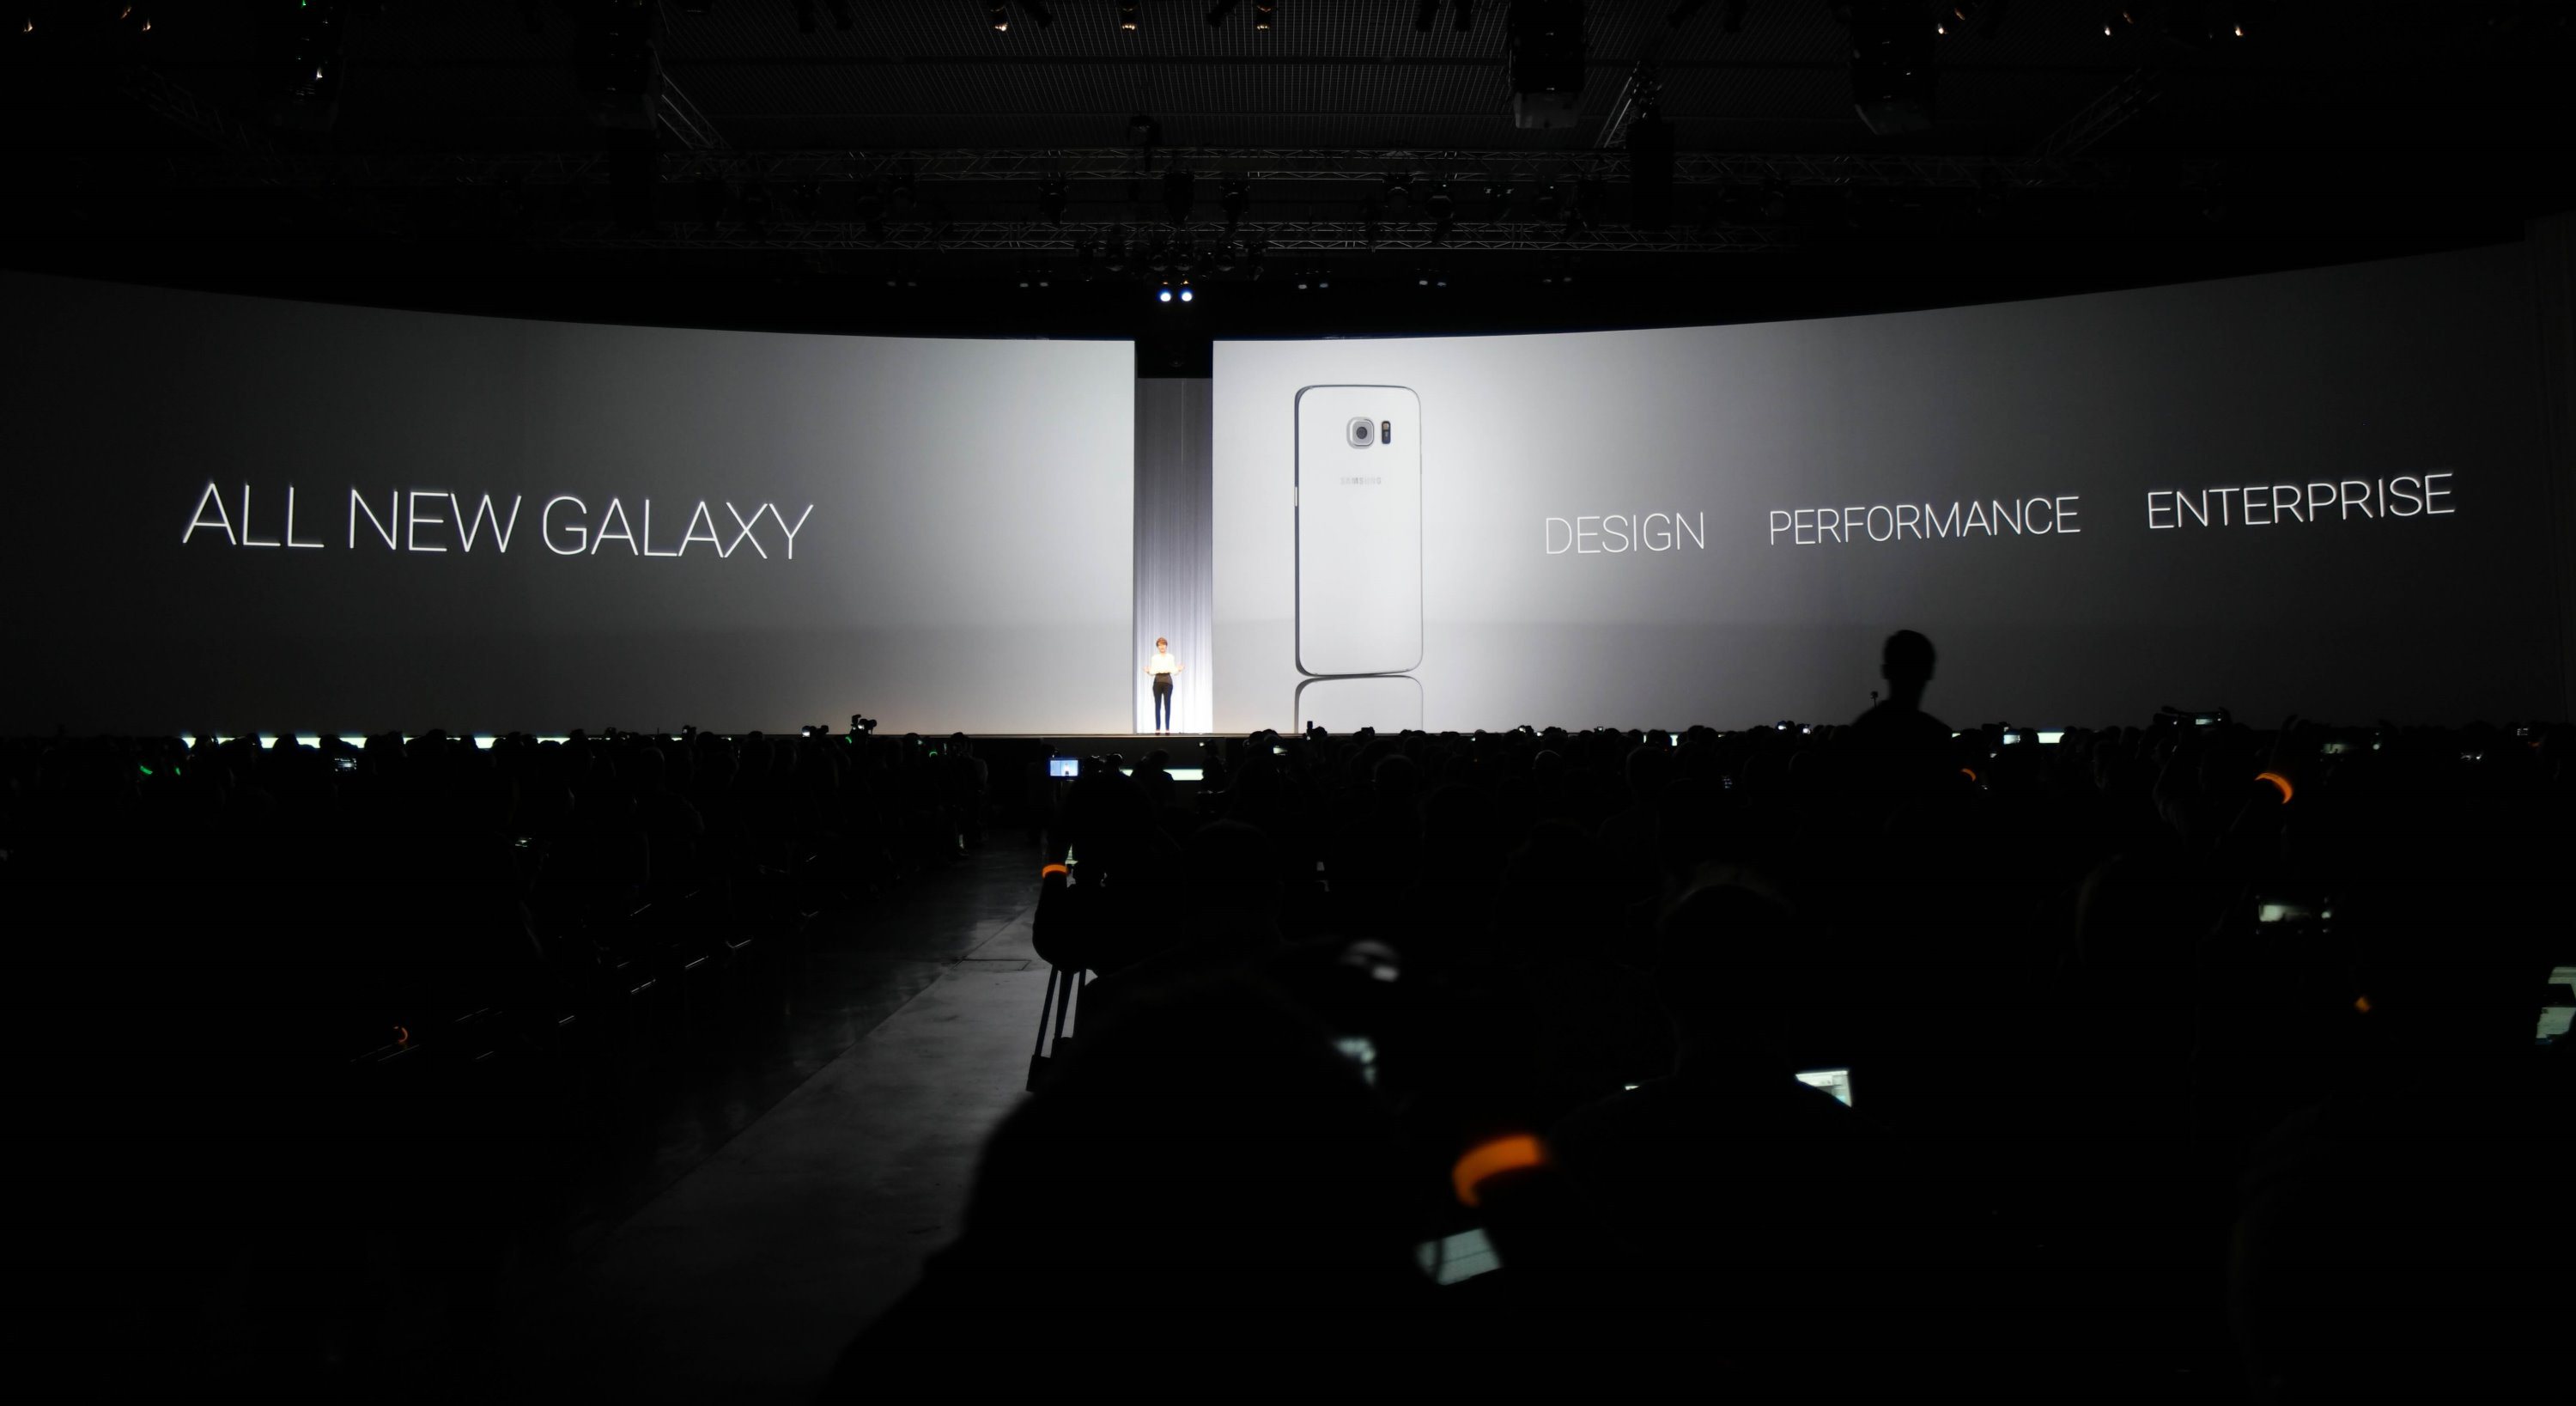 The Samsung S6 Announcement